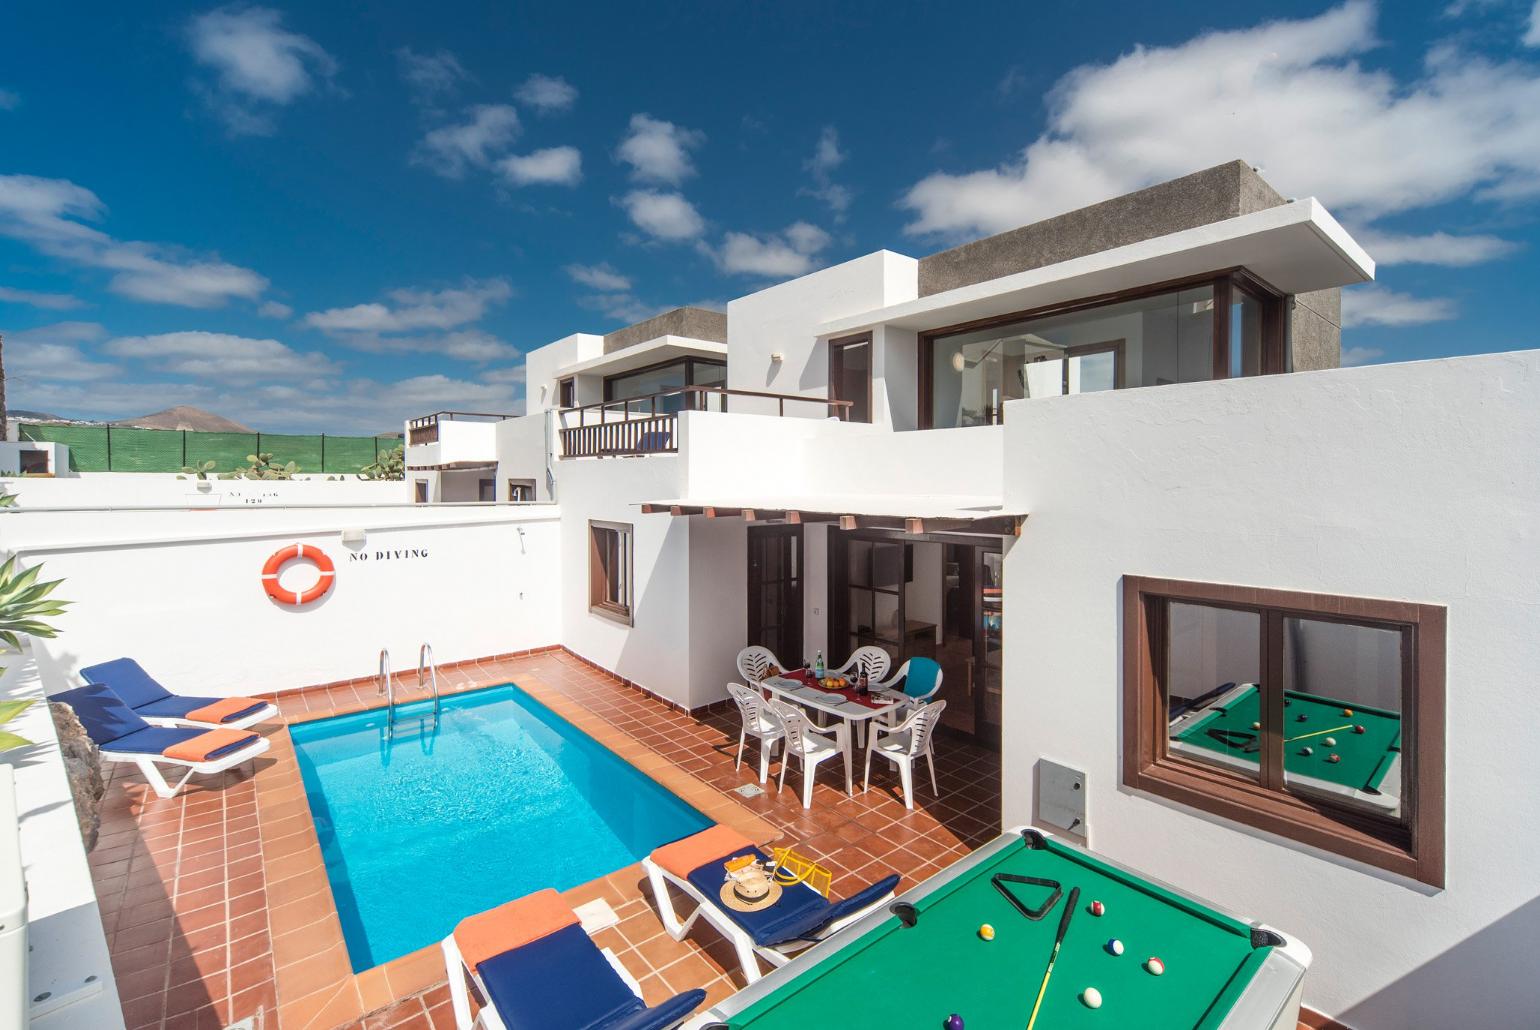 Private pool with terrace area and pool table